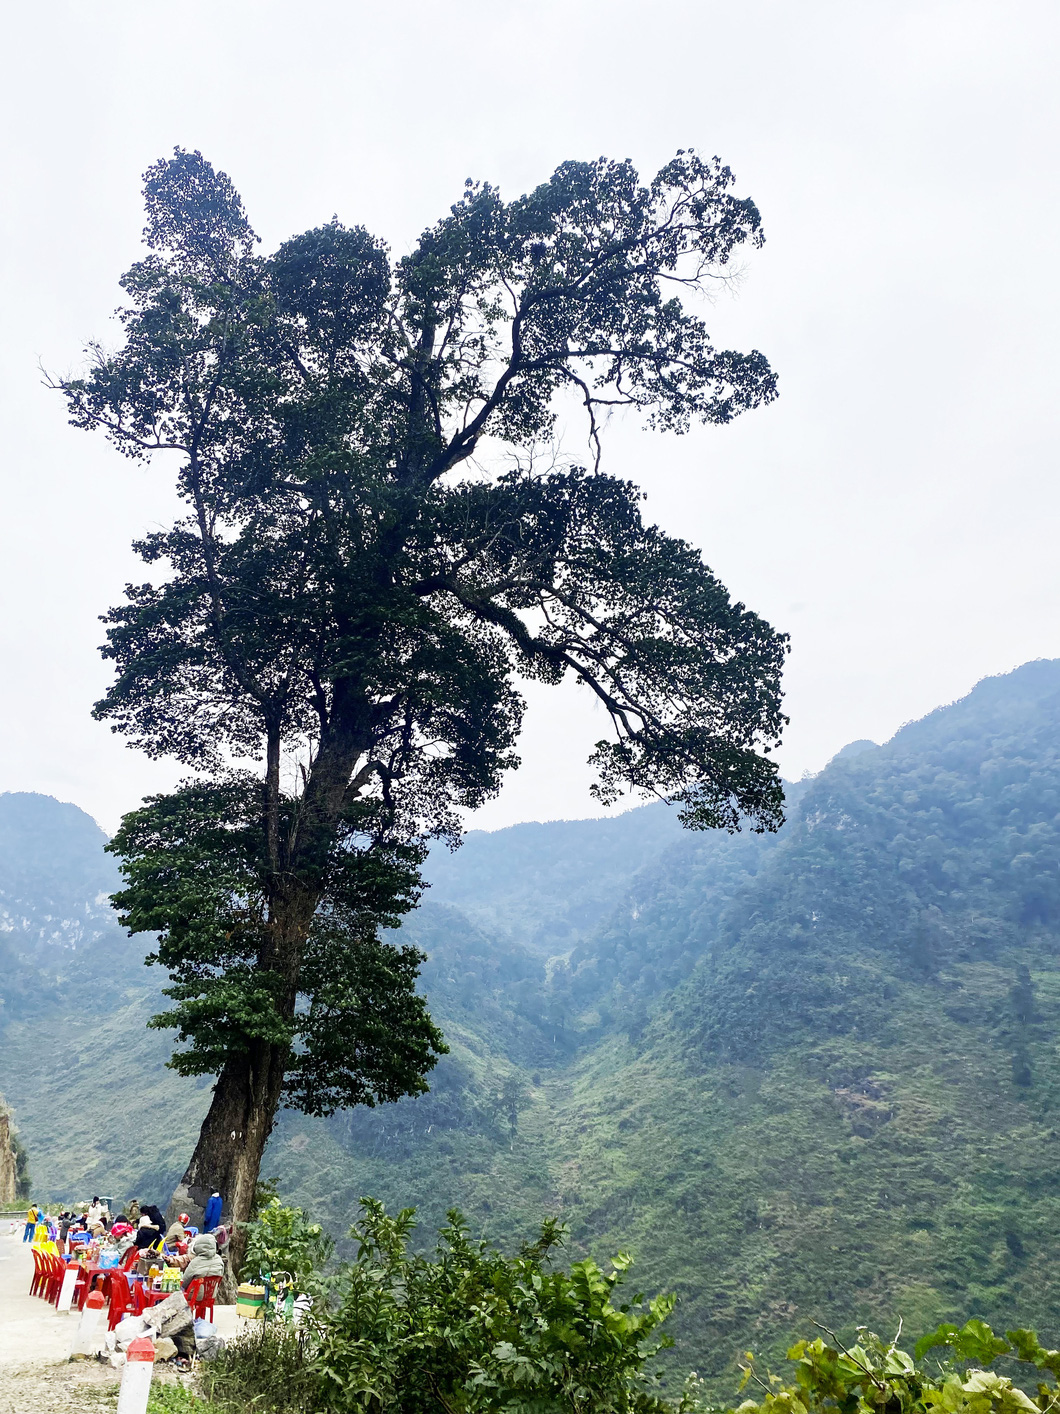 The famous 'lonely' tree - a tourist attraction on National Highway 4C in Can Ty Commune, Ha Giang Province, Vietnam. Photo: Minh Huyen/ Tuoi Tre